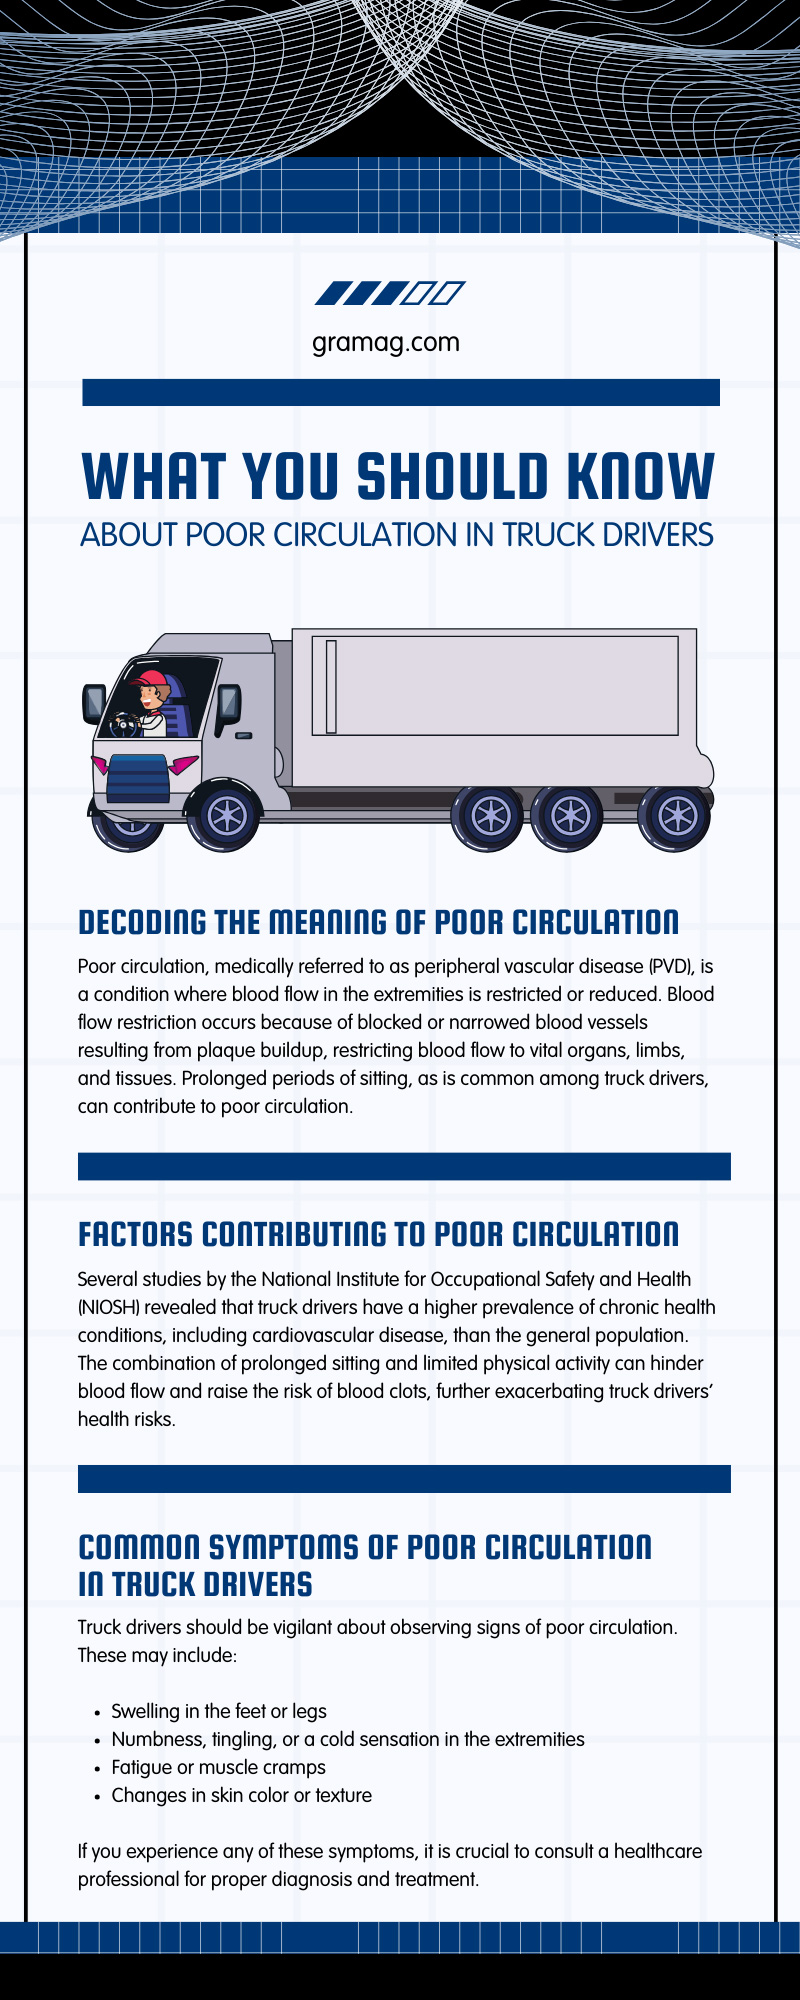 What You Should Know About Poor Circulation in Truck Drivers